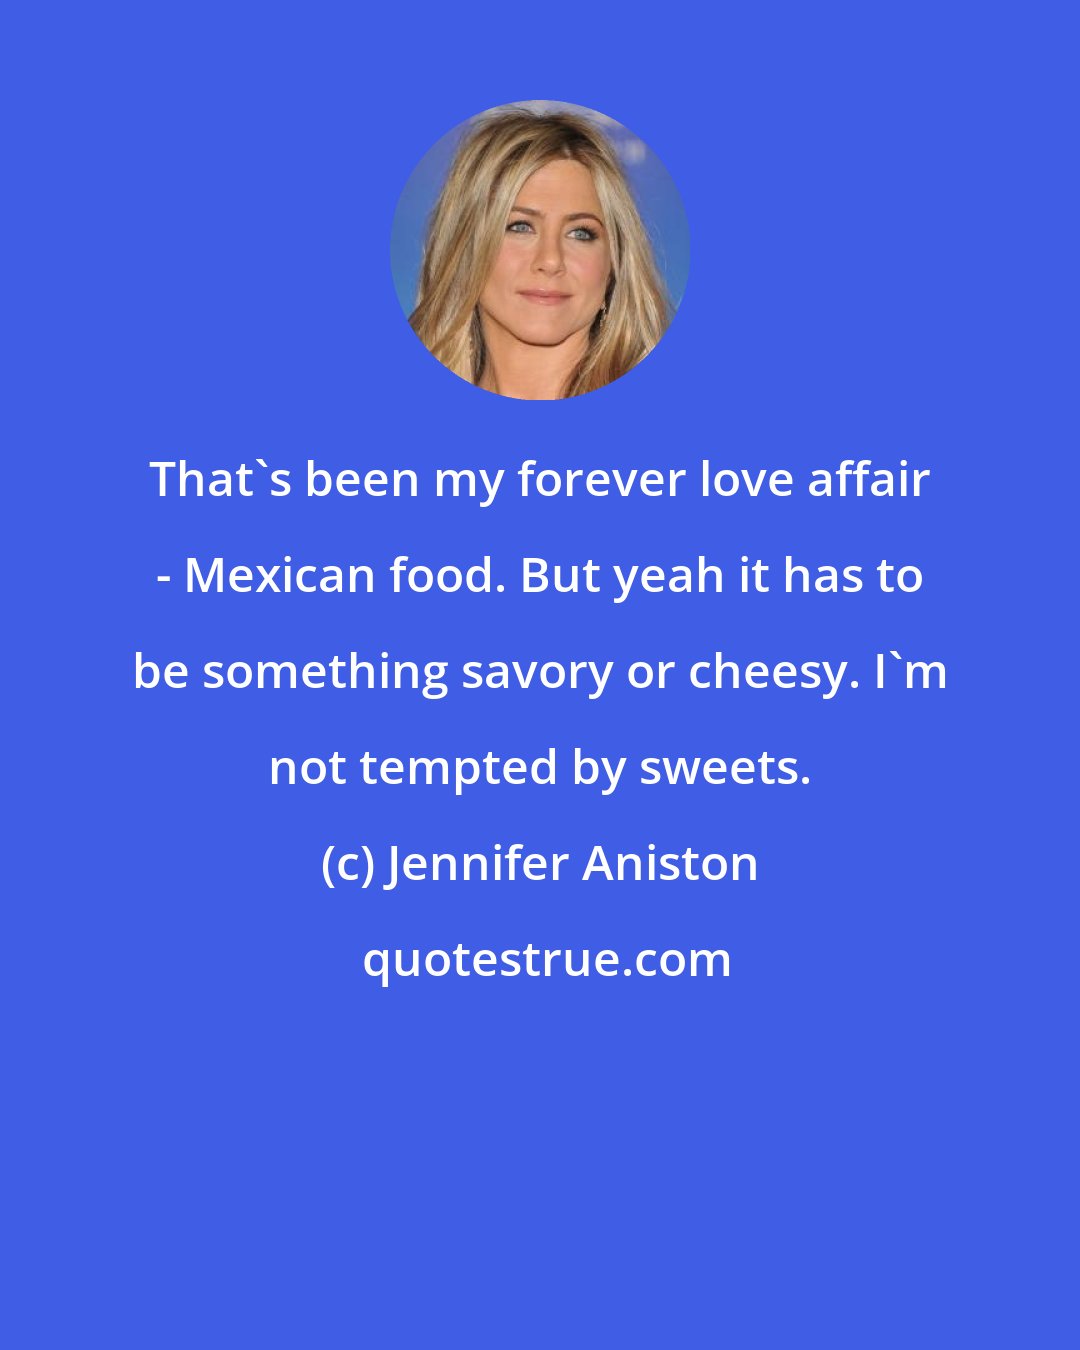 Jennifer Aniston: That's been my forever love affair - Mexican food. But yeah it has to be something savory or cheesy. I'm not tempted by sweets.